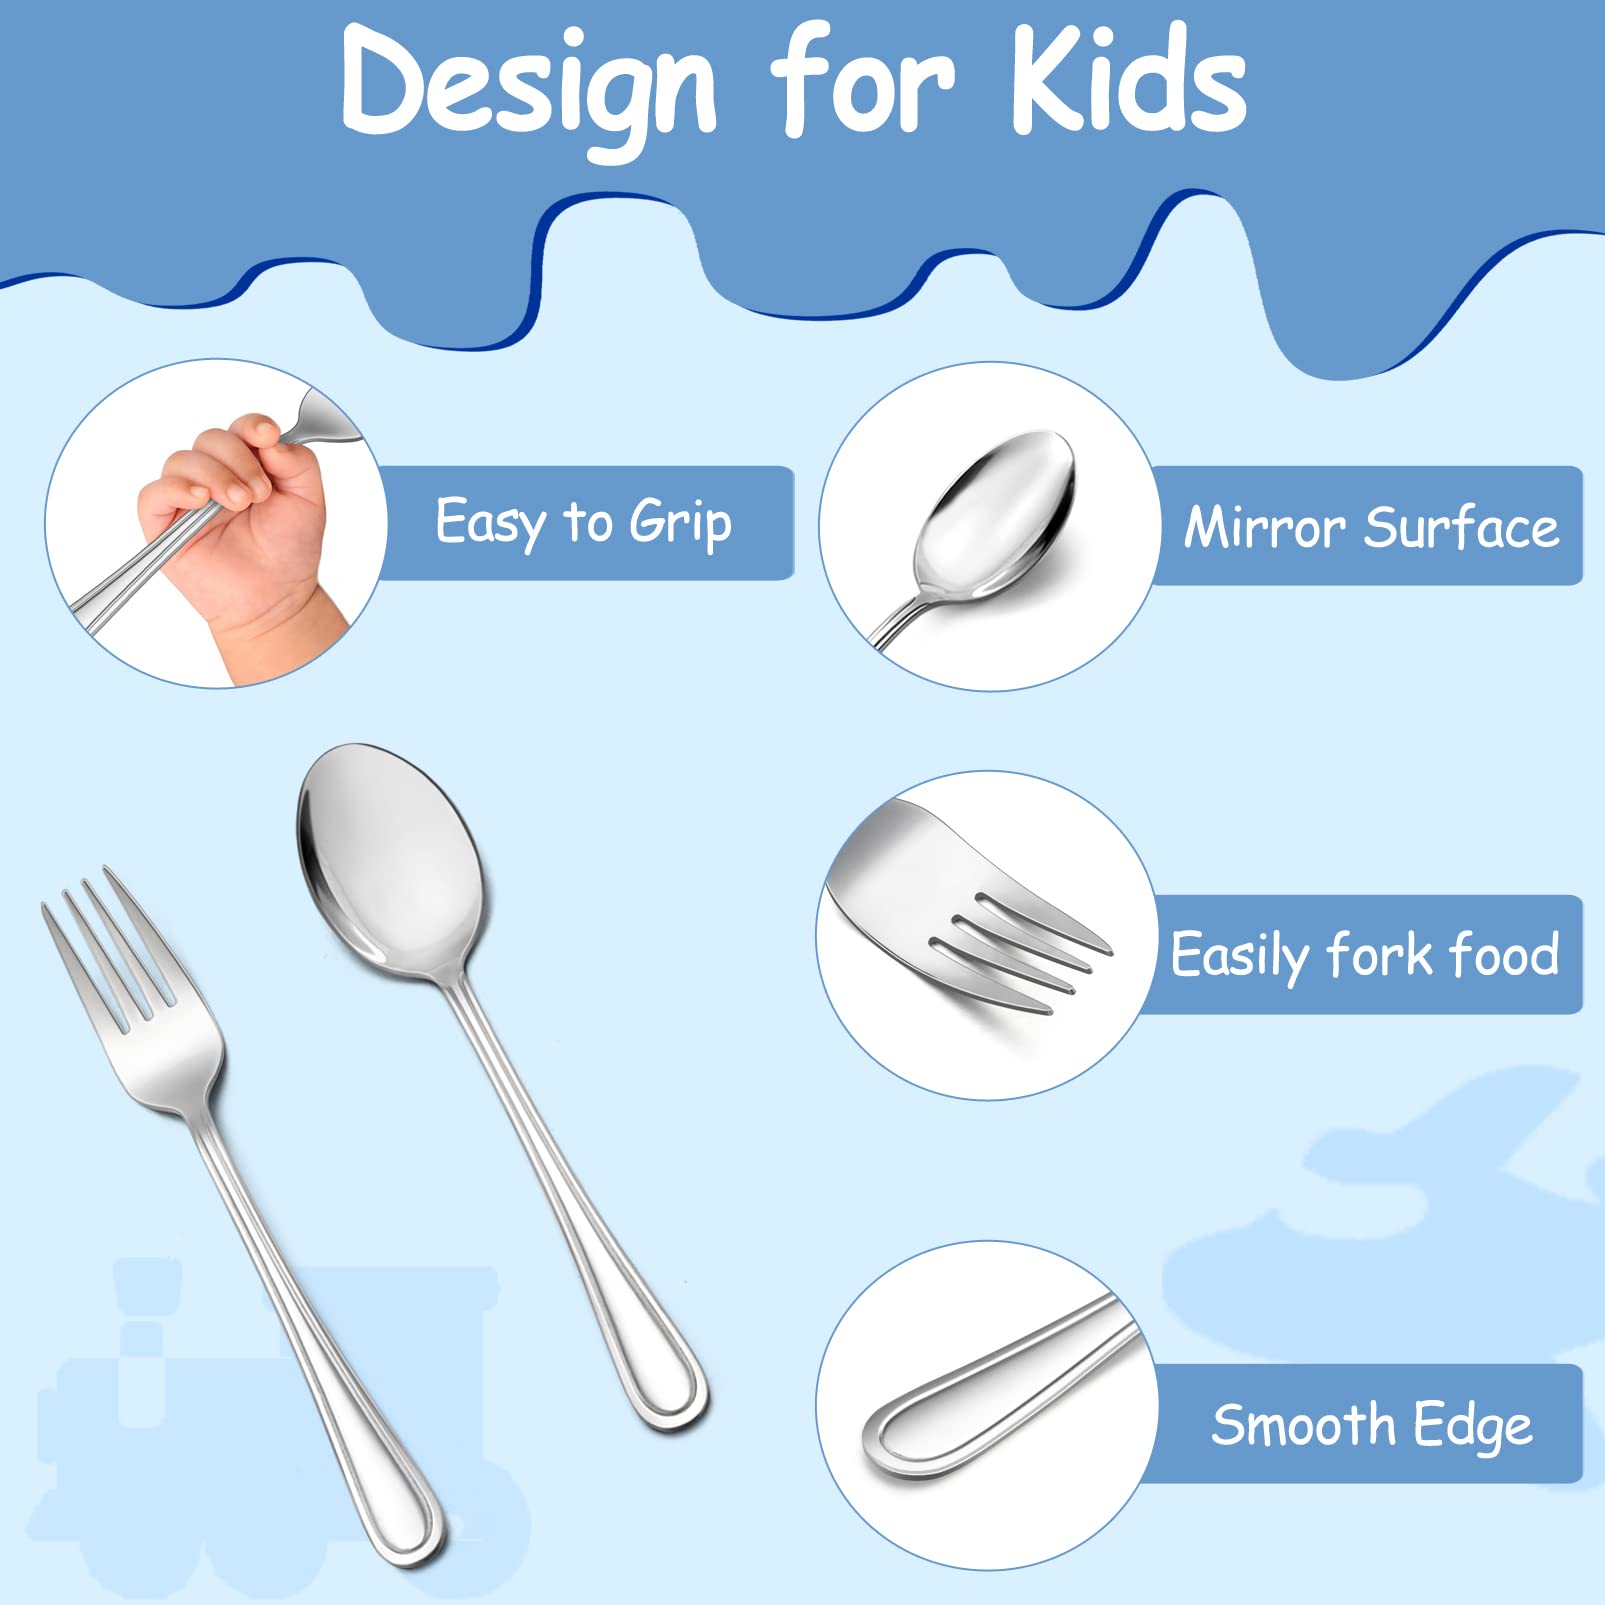 TeamFar Toddler Utensils, Stainless Steel Toddler Silverware Small Kid Cutlery Set for Self-Feeding, with Line Patterned Edge, Healthy & Non Toxic, Mirror Surface & Dishwasher Safe–3 Forks + 3 Spoons